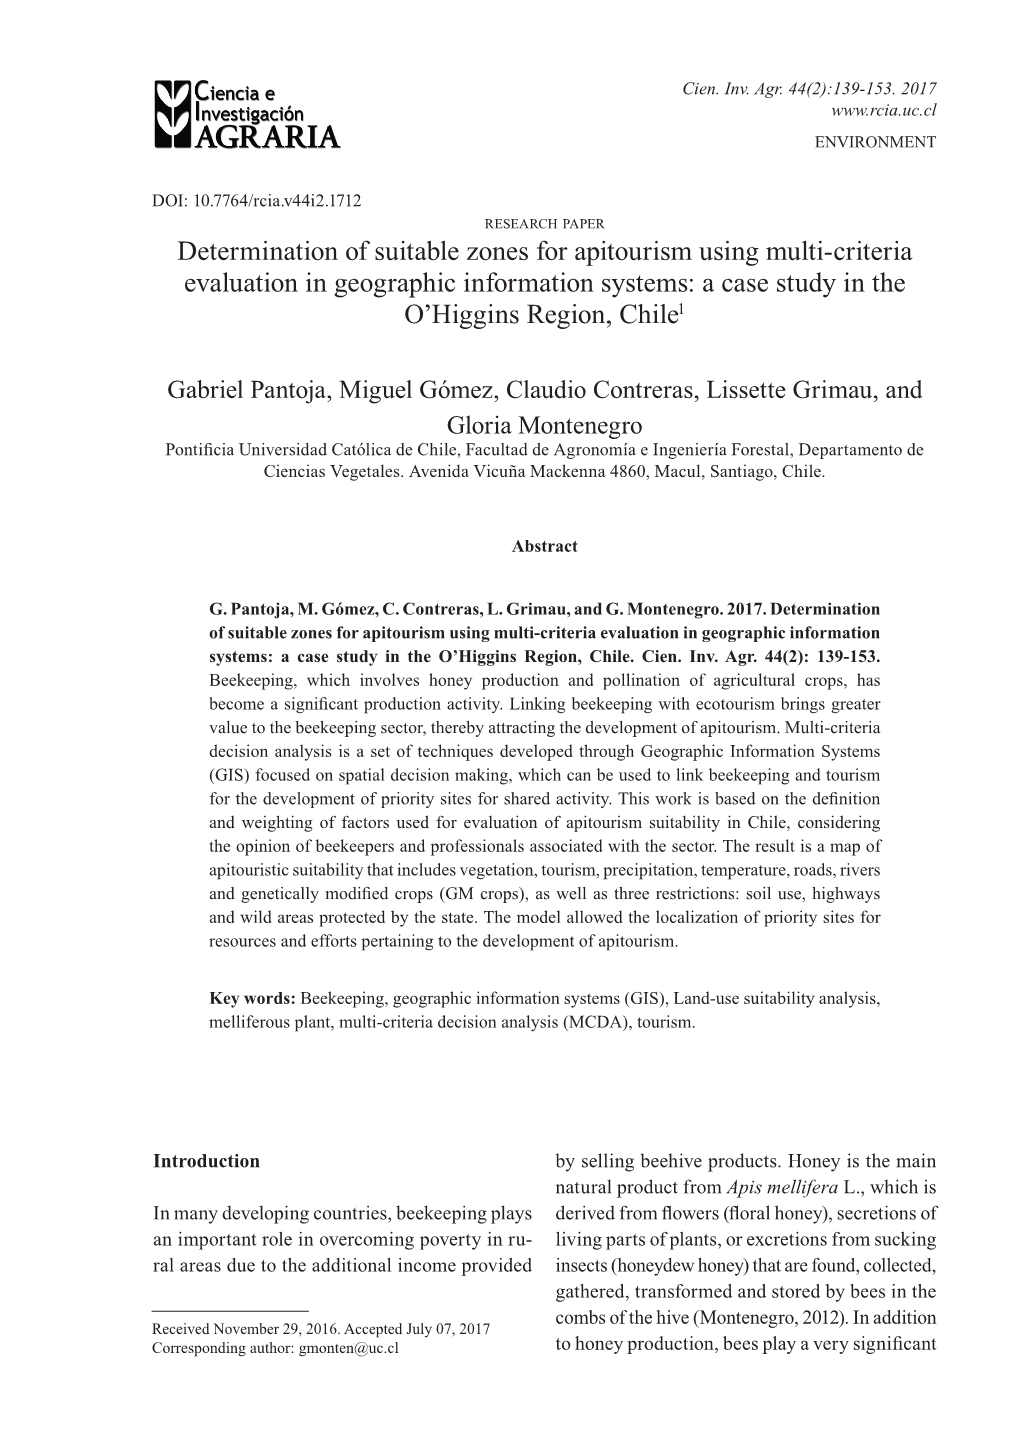 Determination of Suitable Zones for Apitourism Using Multi-Criteria Evaluation in Geographic Information Systems: a Case Study in the O’Higgins Region, Chile1